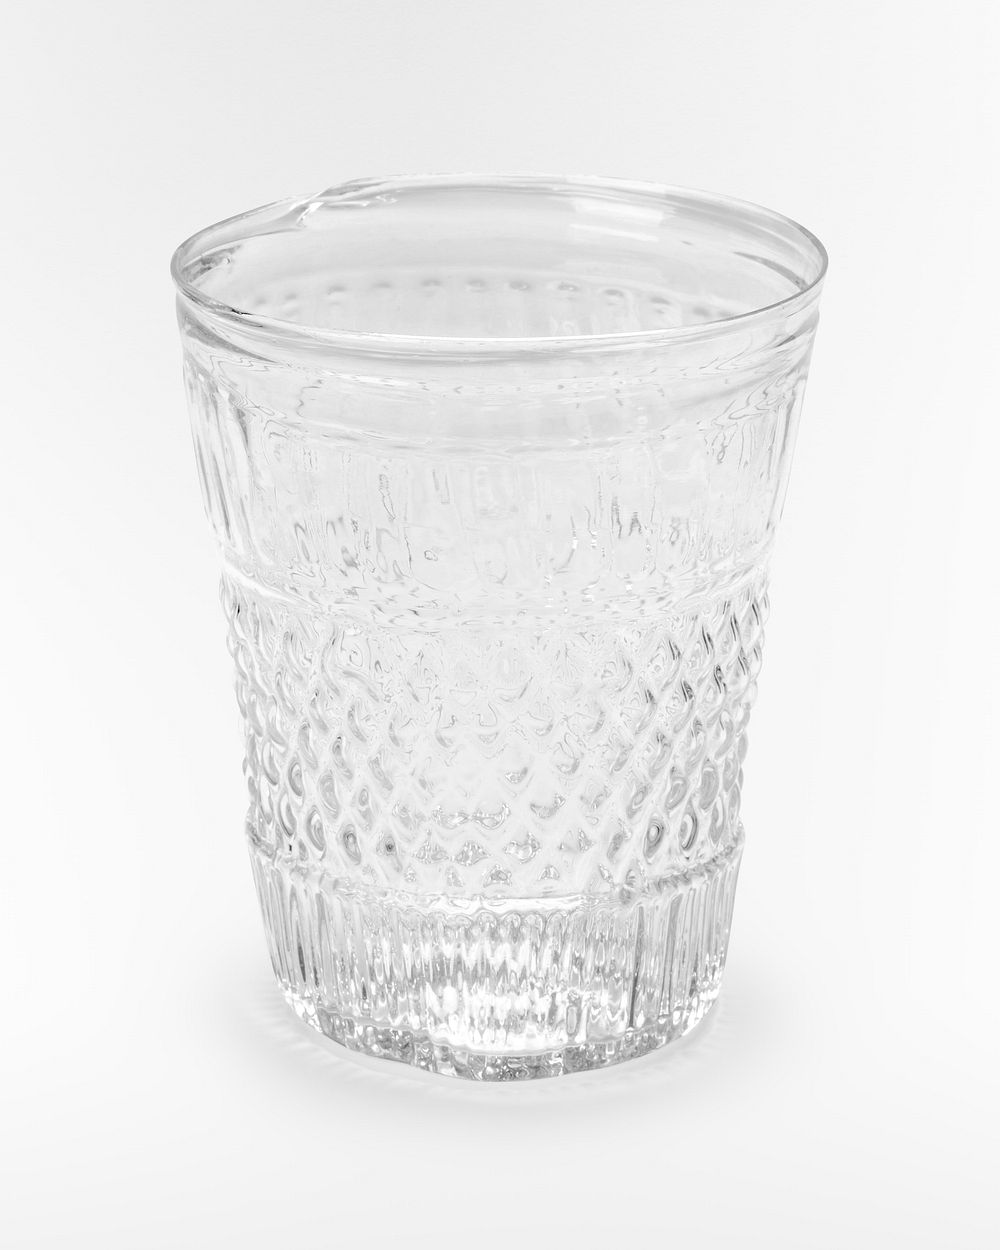 Water glass. Original from the Minneapolis Institute of Art.